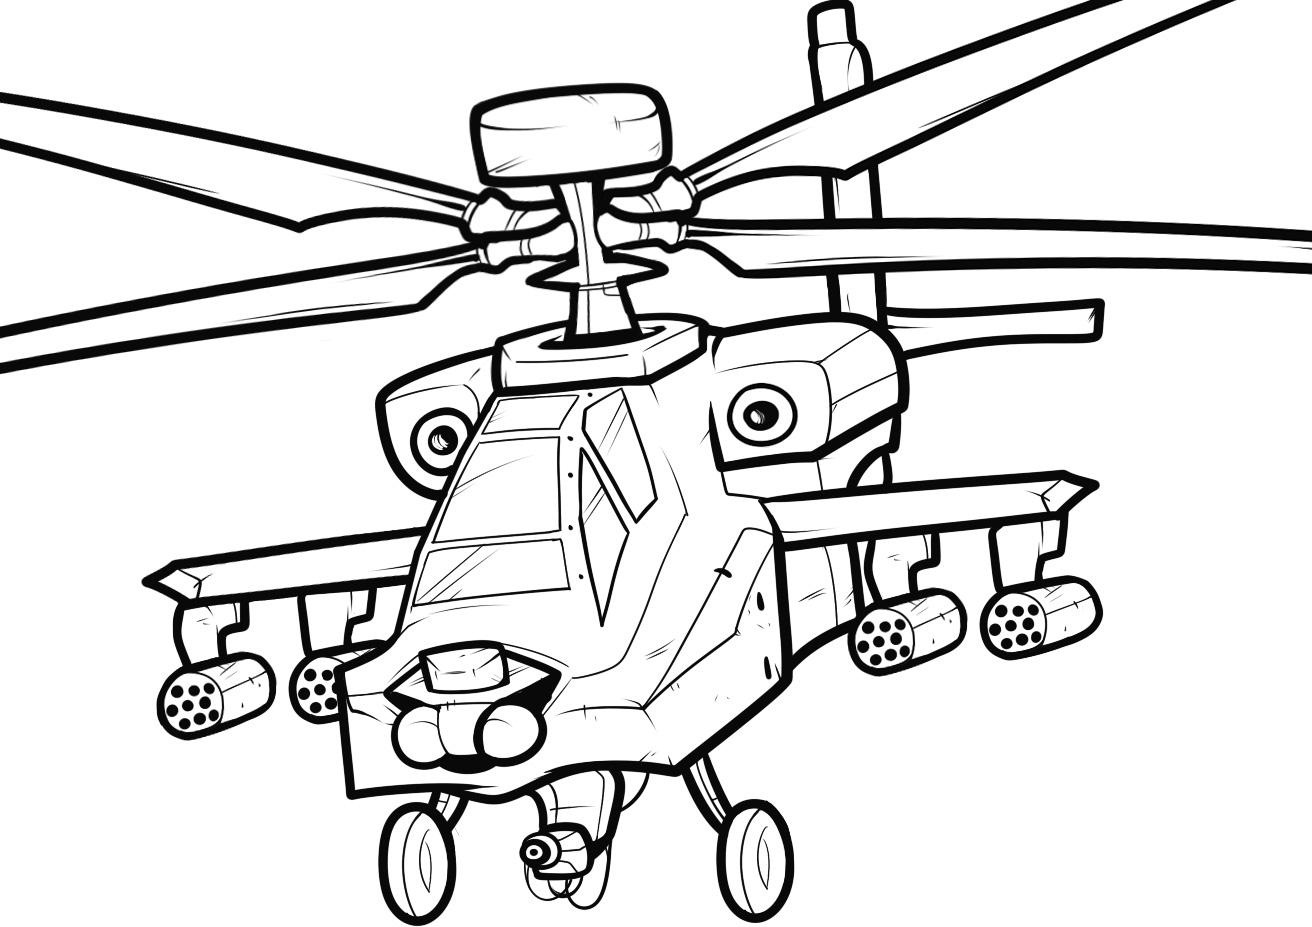 Helicopter coloring #8, Download drawings